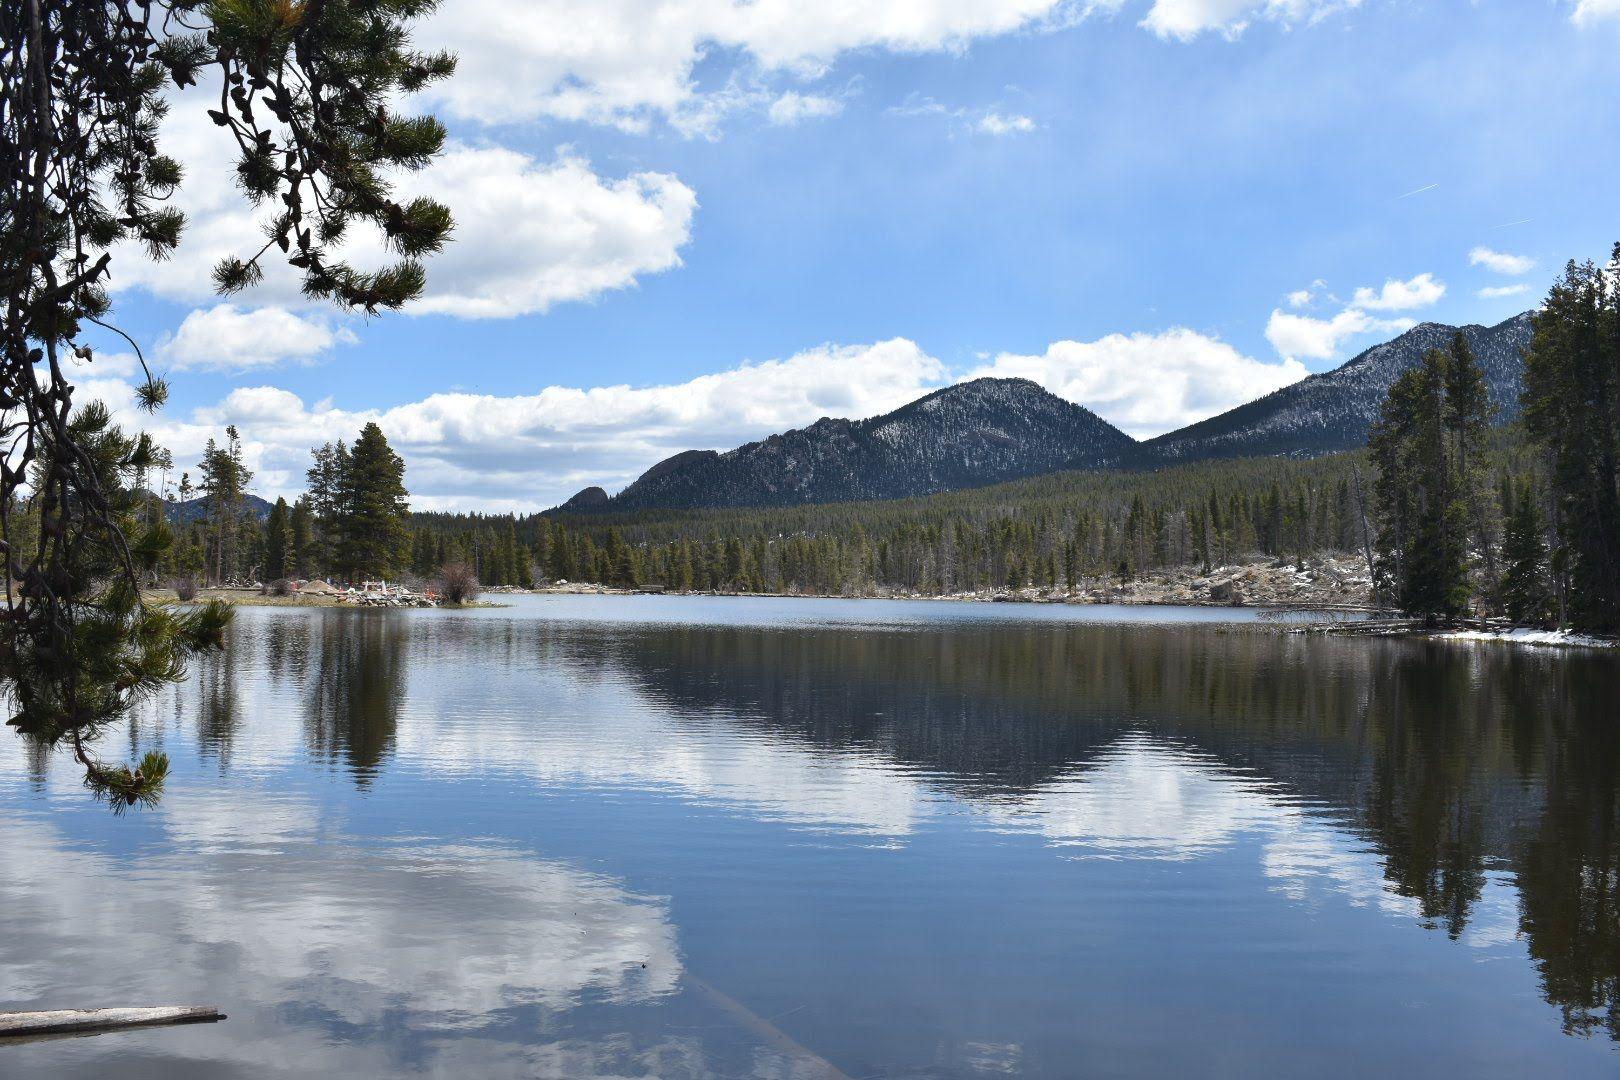 A view of Sprague Lake with a reflection of a mountain and trees.